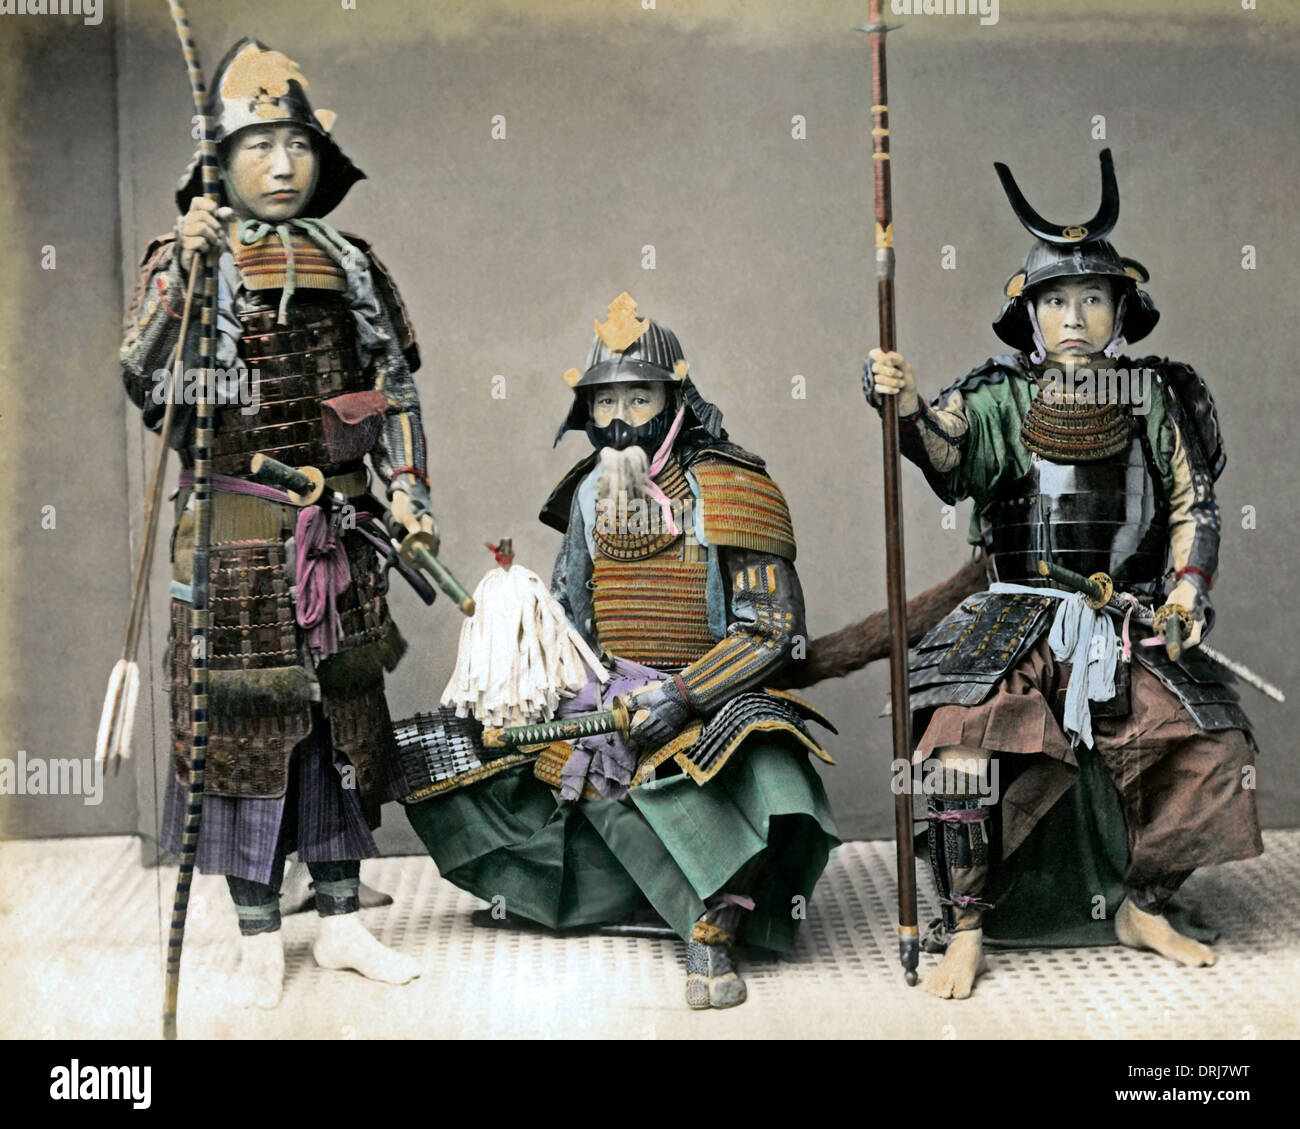 Three soldiers in armour, Japan Stock Photo